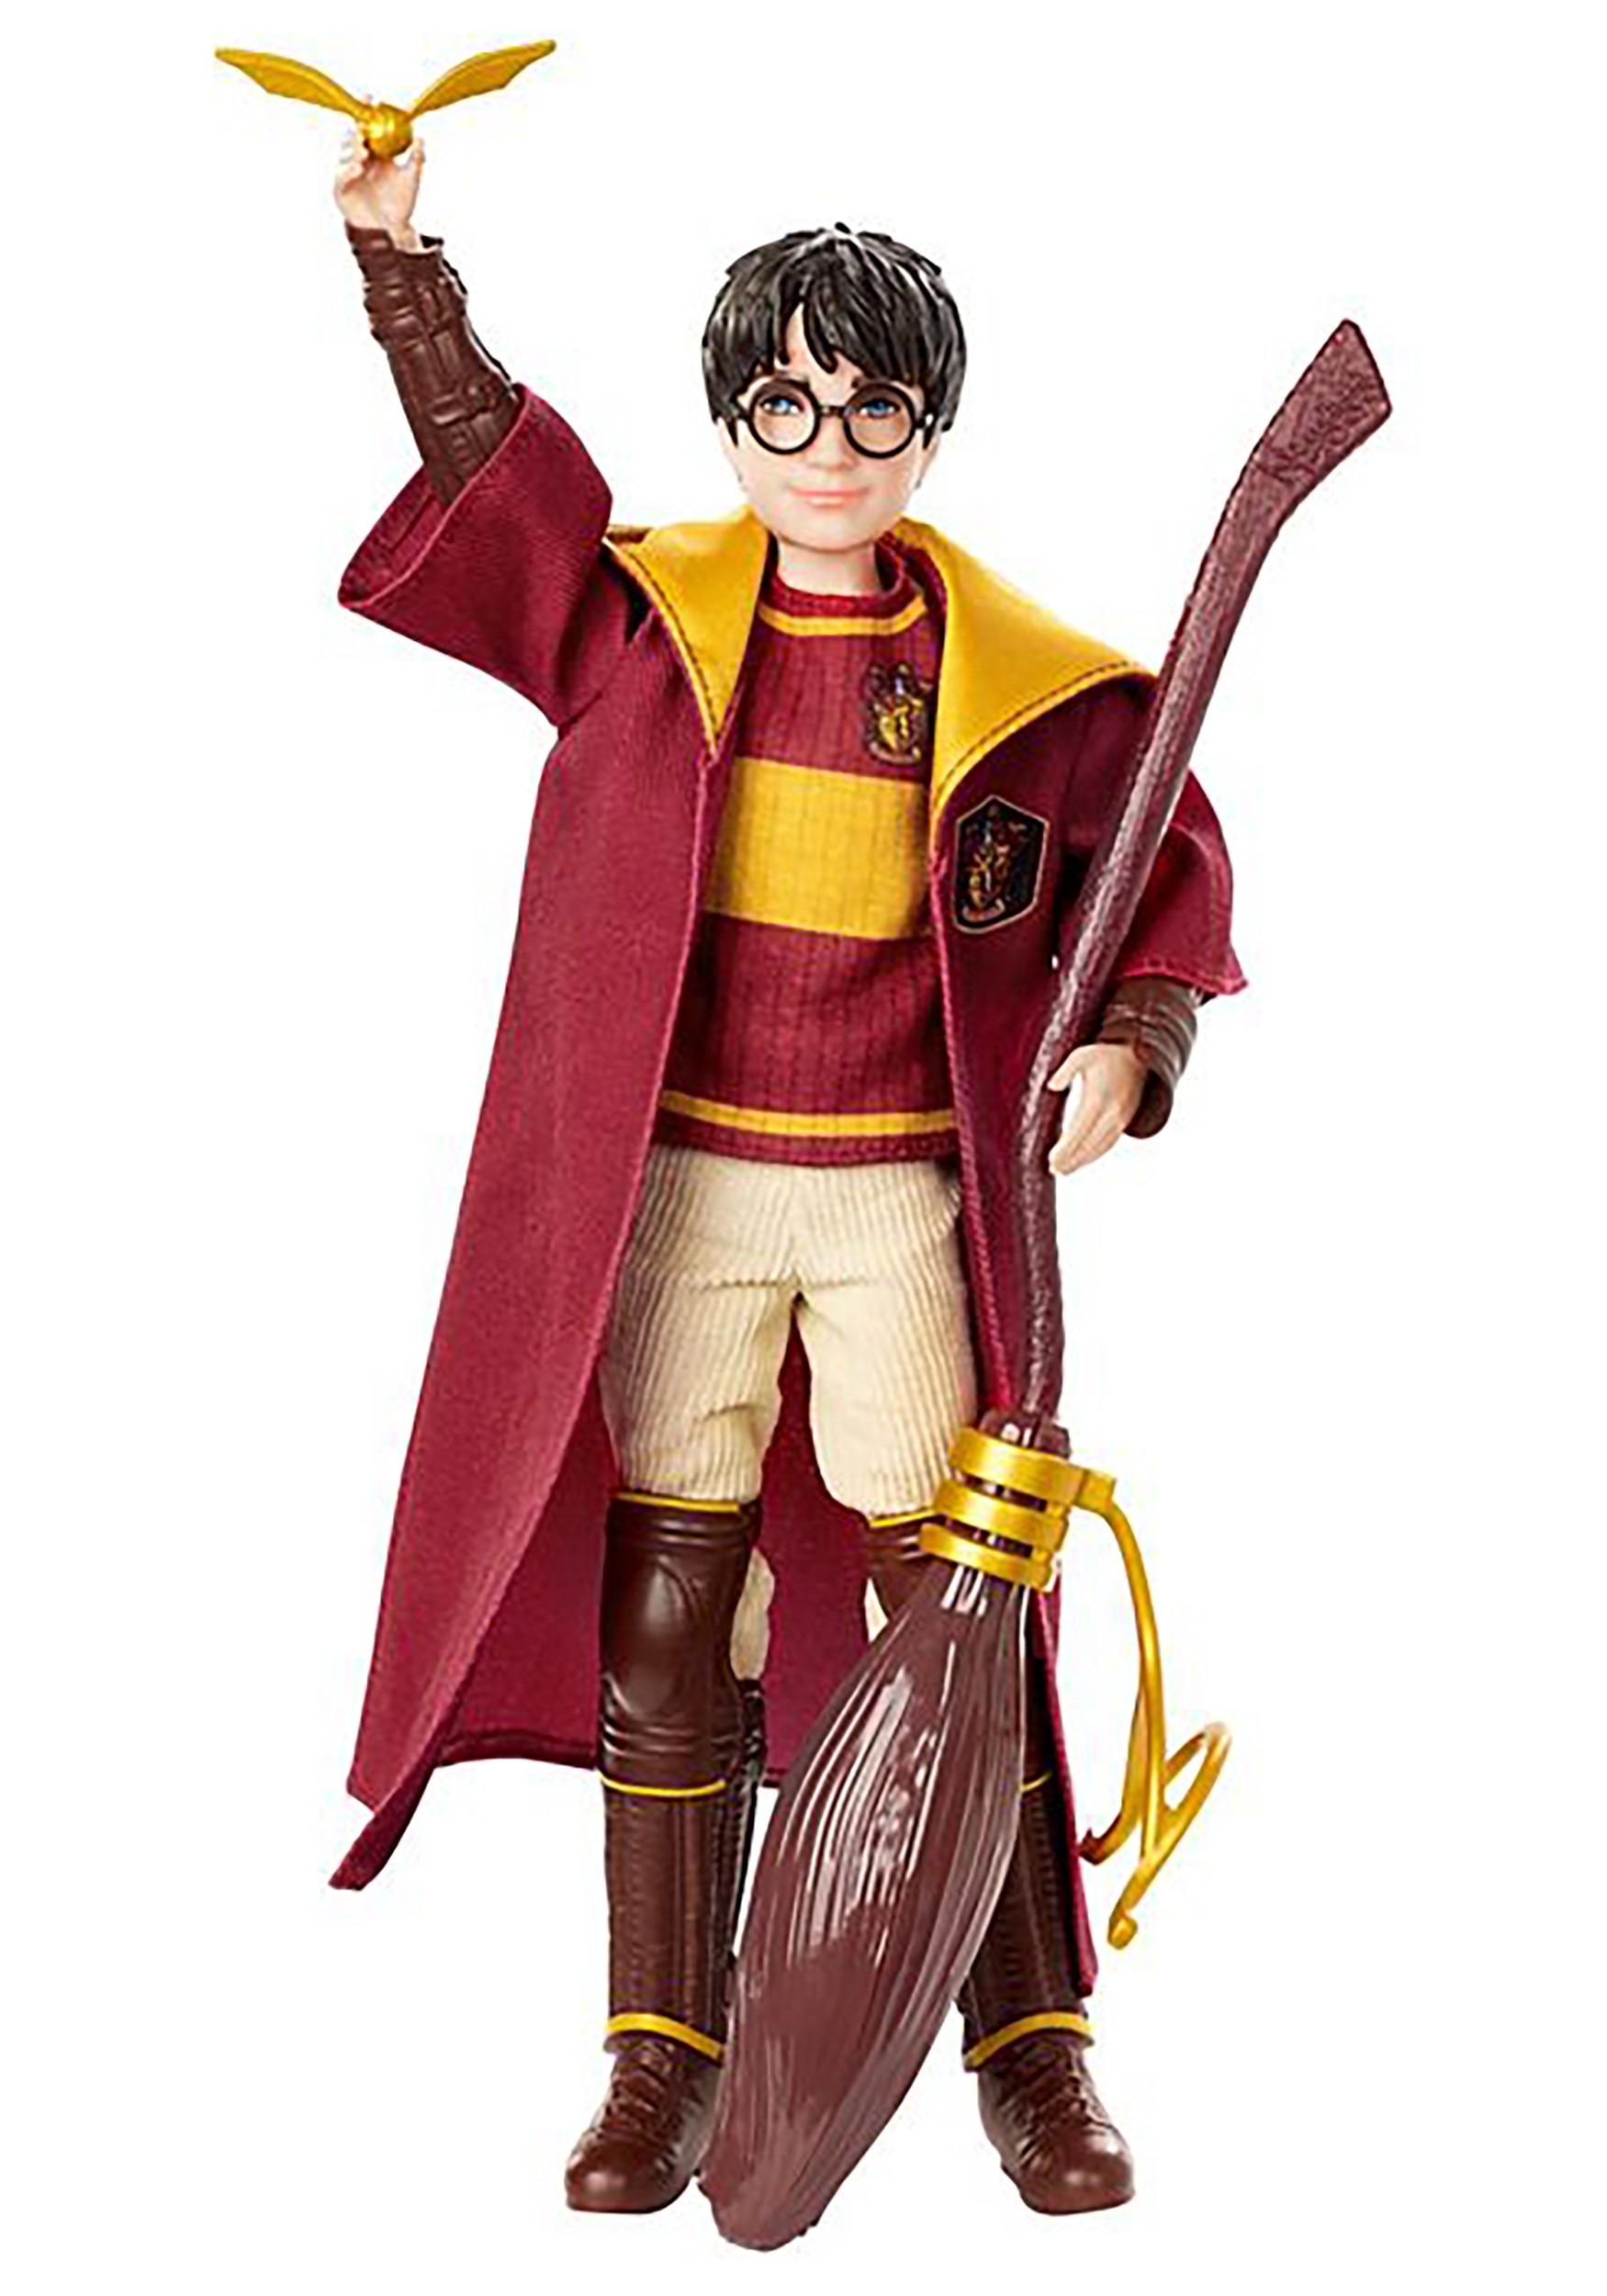 Harry Potter w/ the Snitch Quidditch Doll